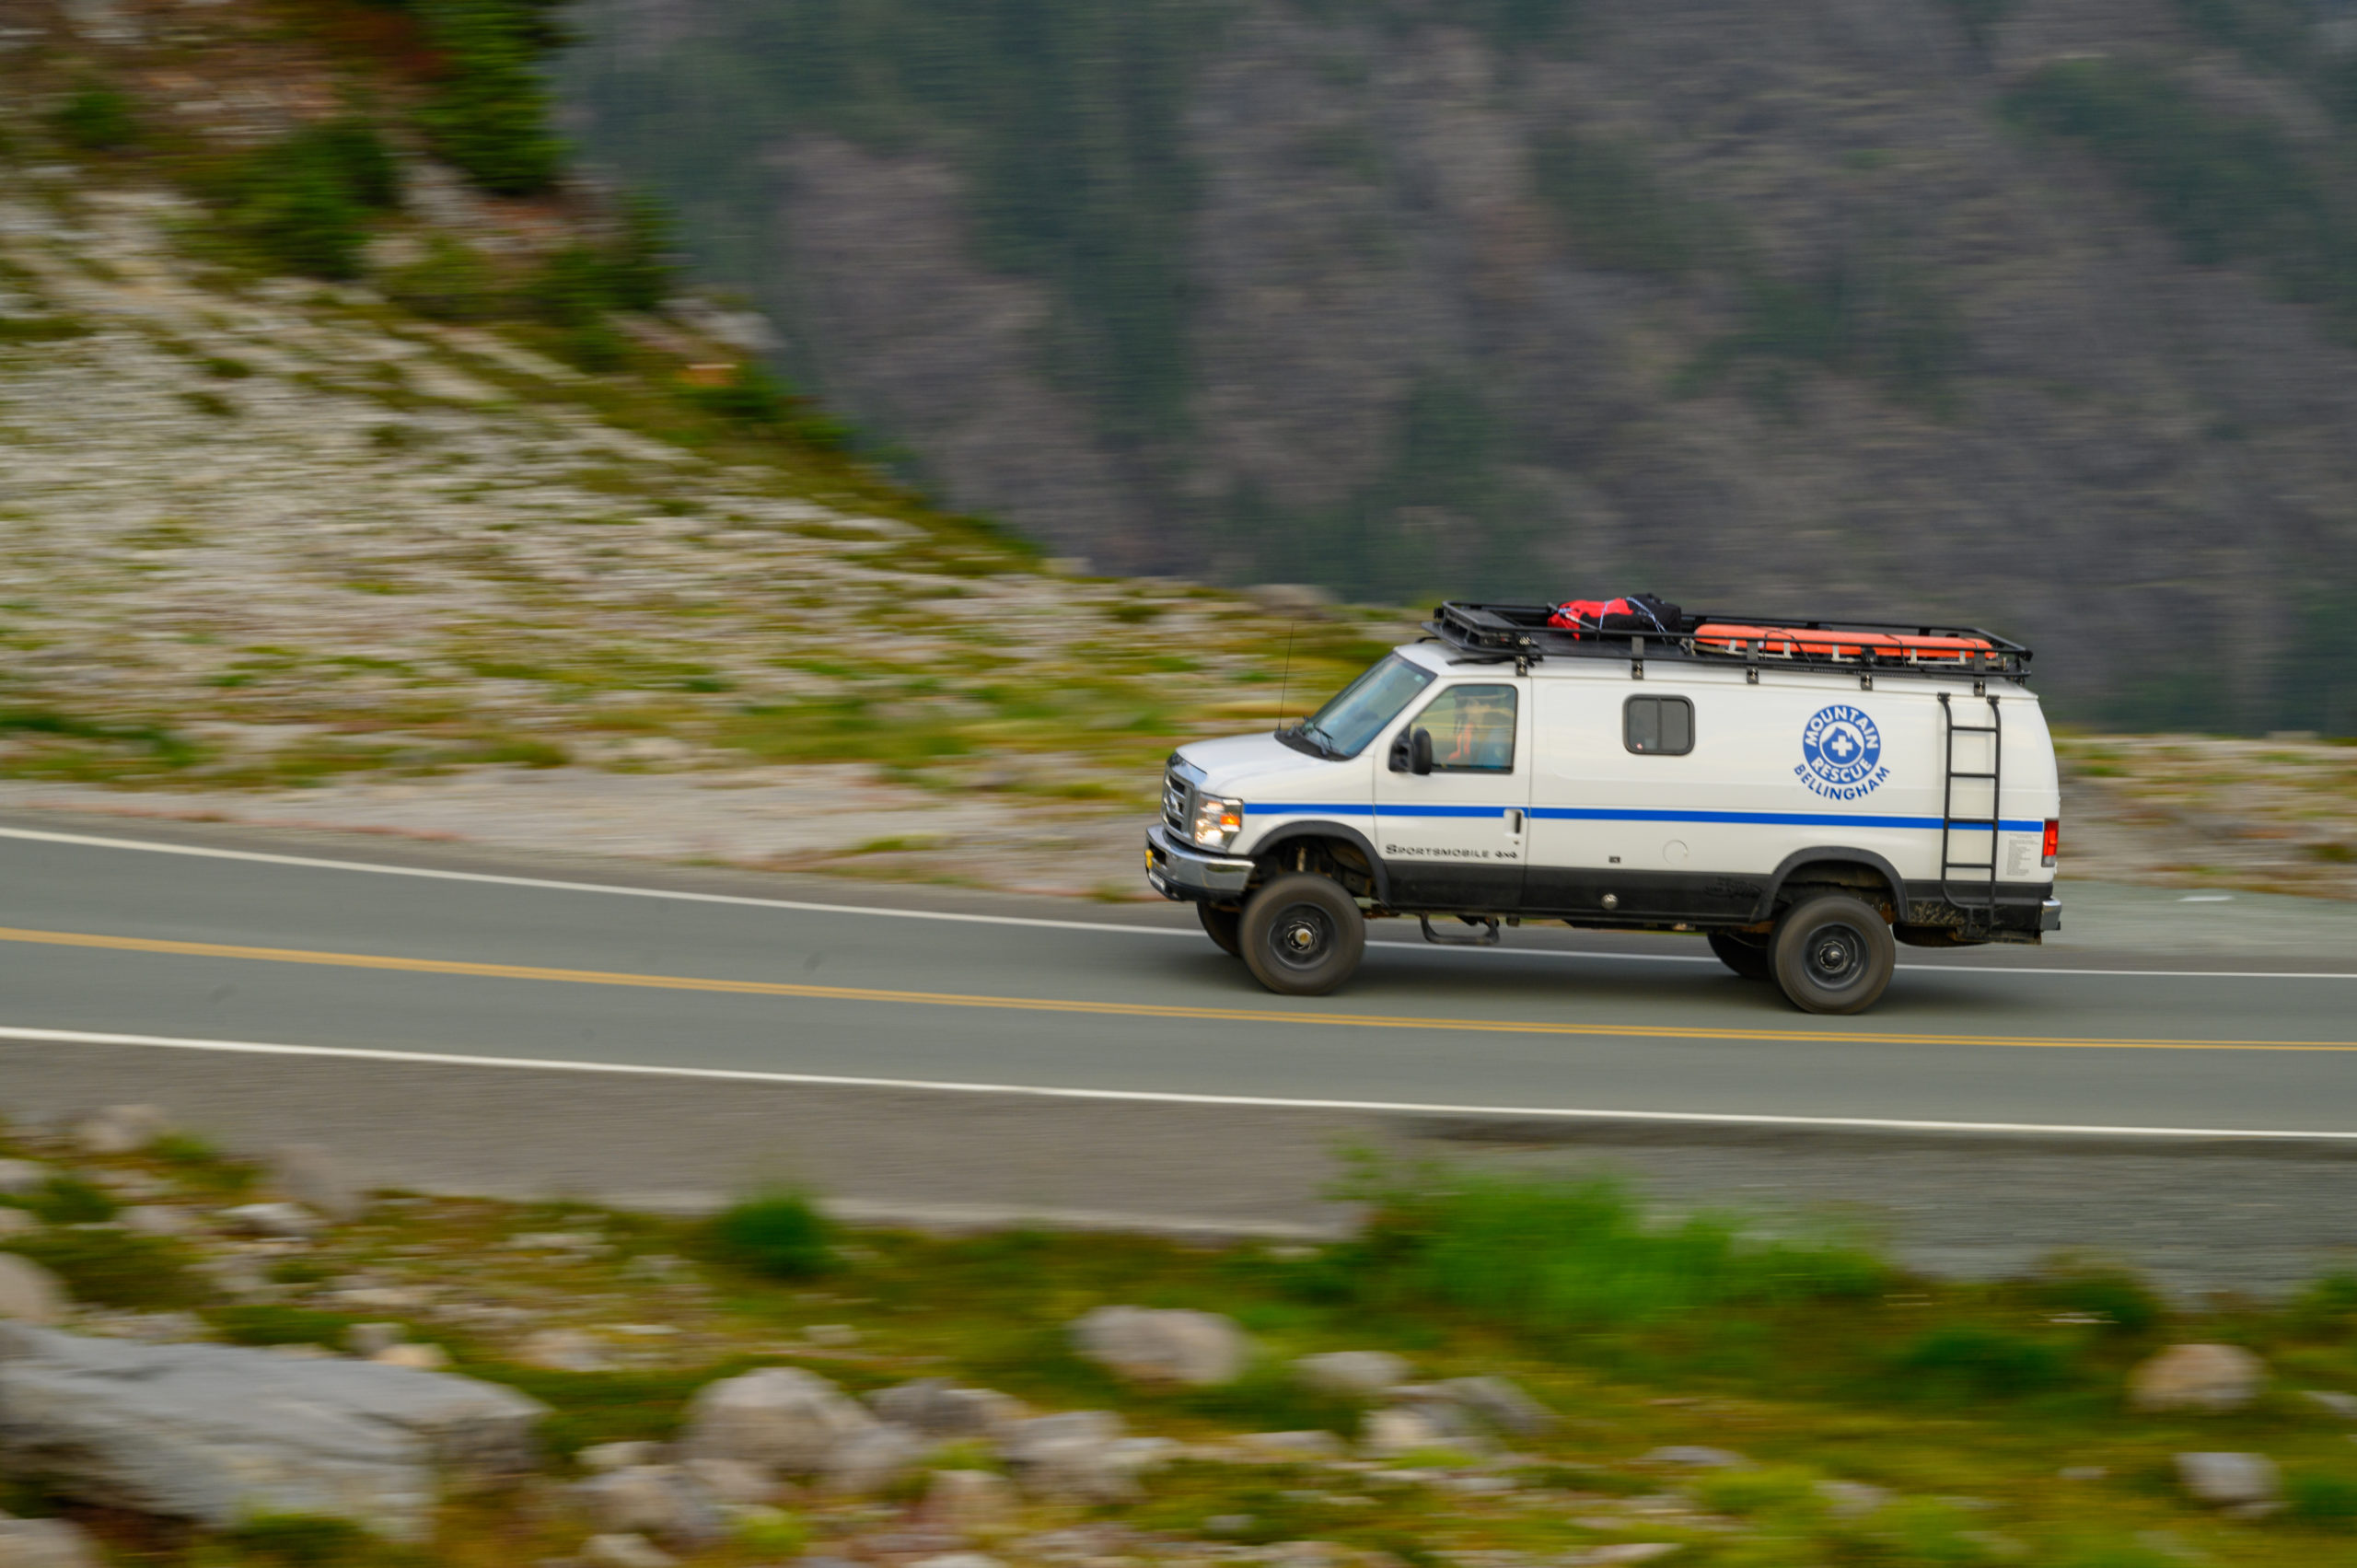 Search and Rescue vehicle travels at speed up a mountain highway